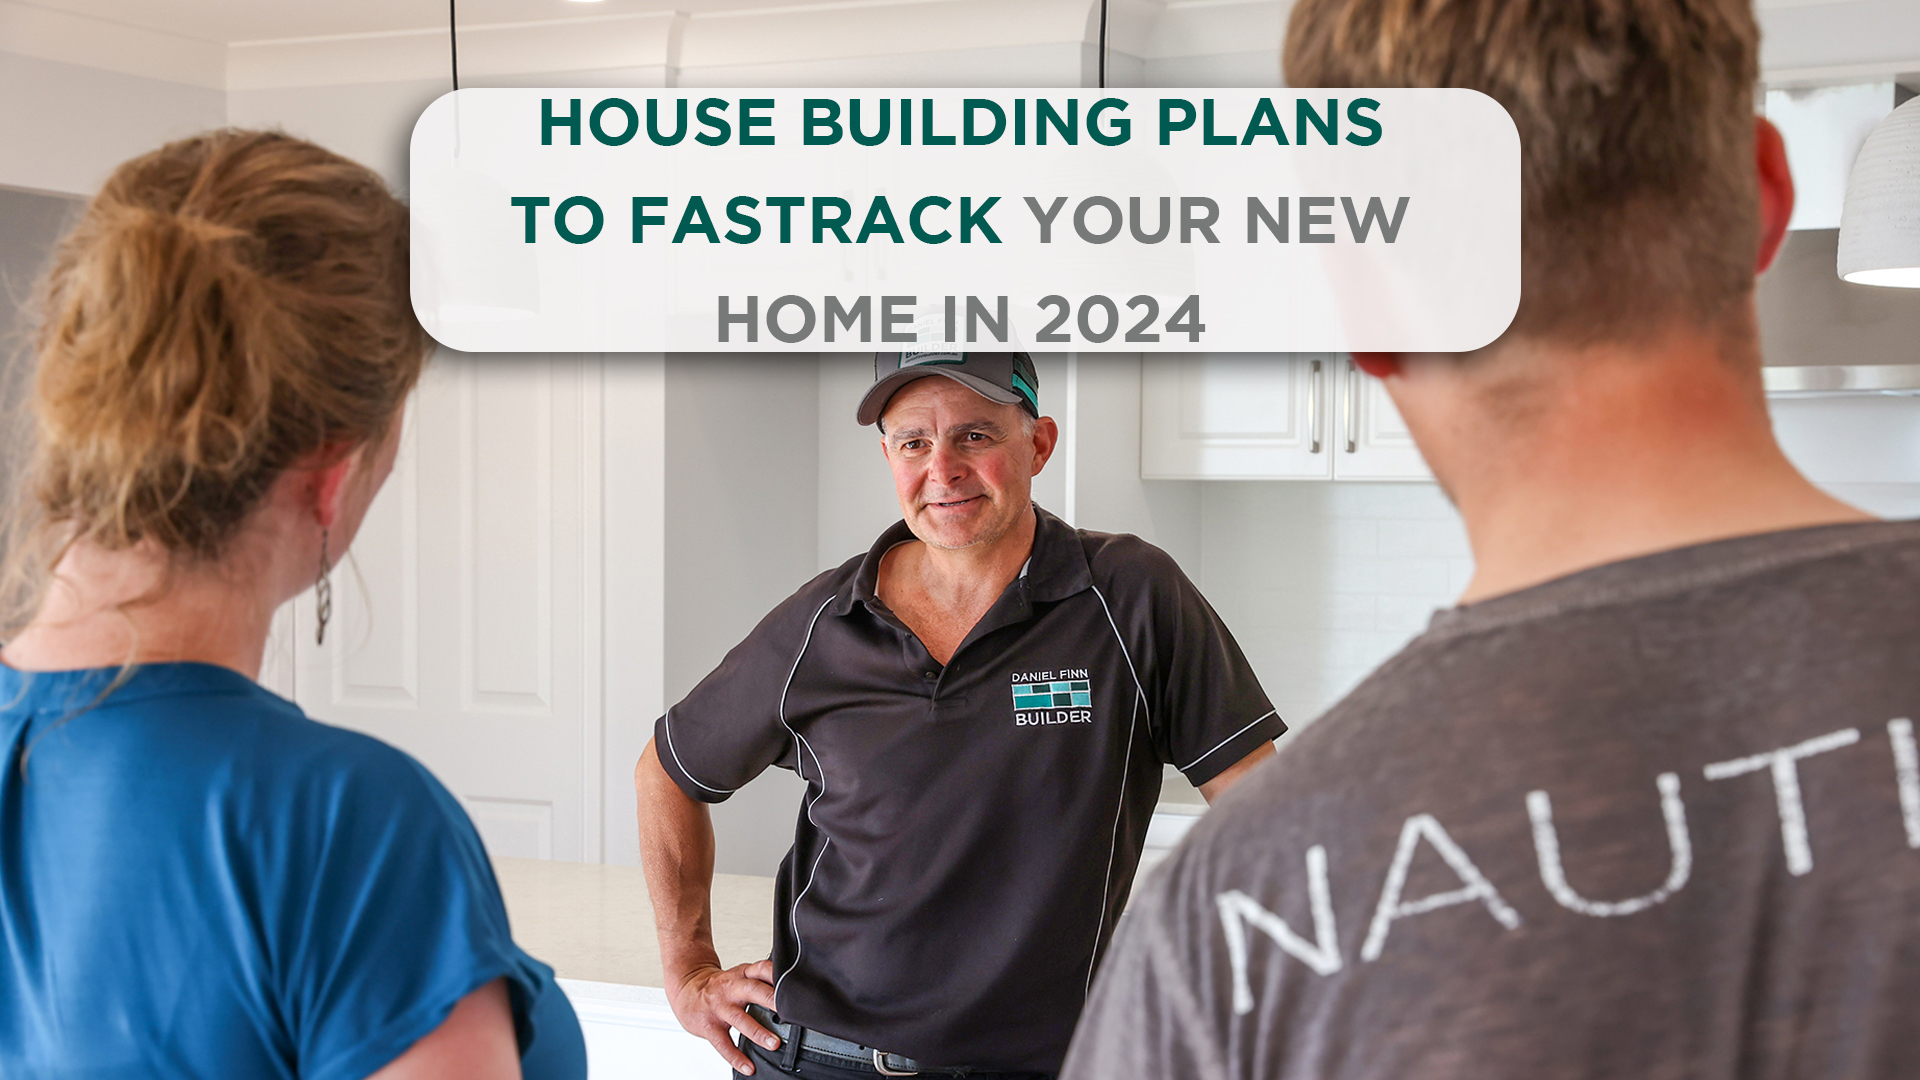 House Building Plans to Fast-track Your New Home in 2024